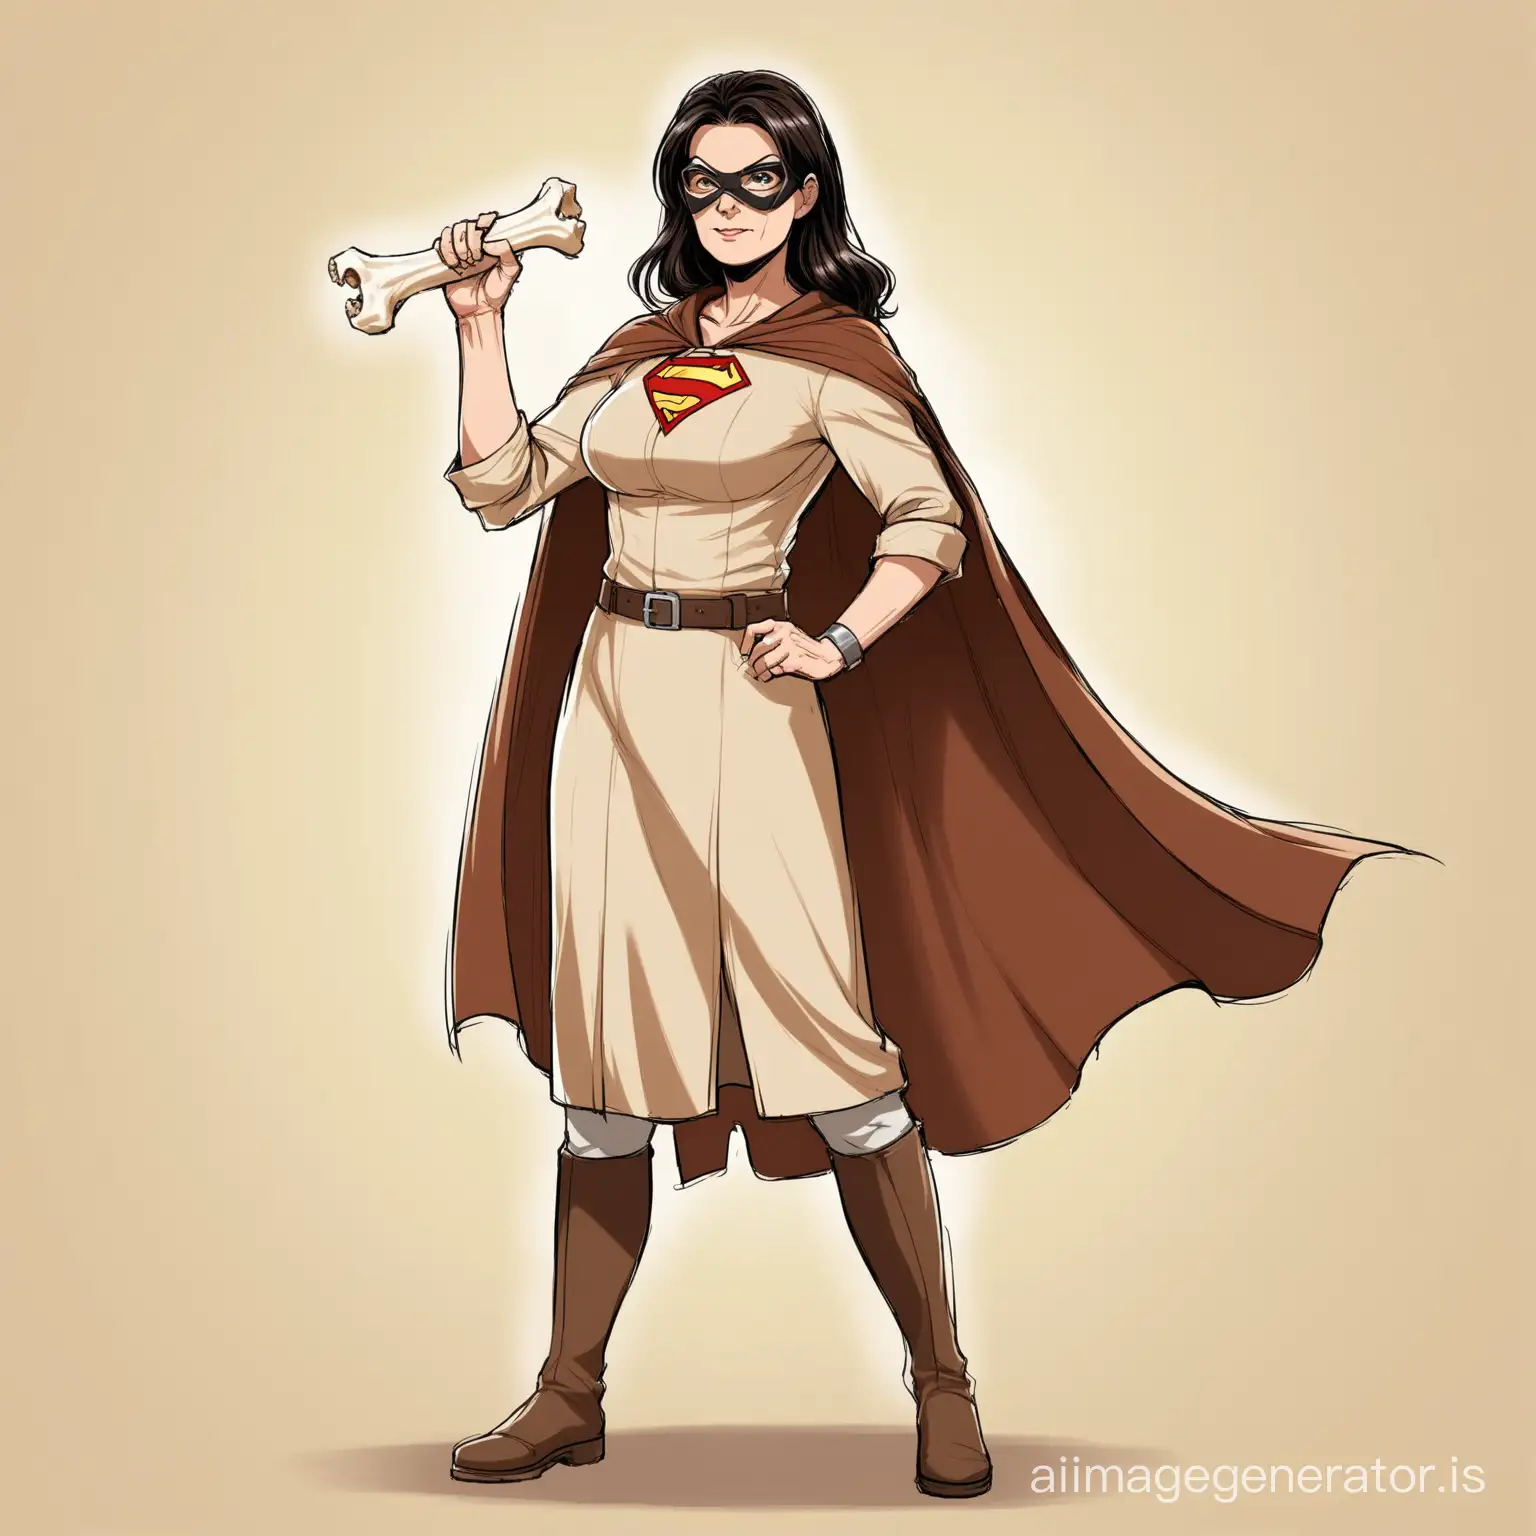 Experienced-Female-Archaeologist-Portrayed-as-a-Heroic-Figure-with-Bone-Artifact